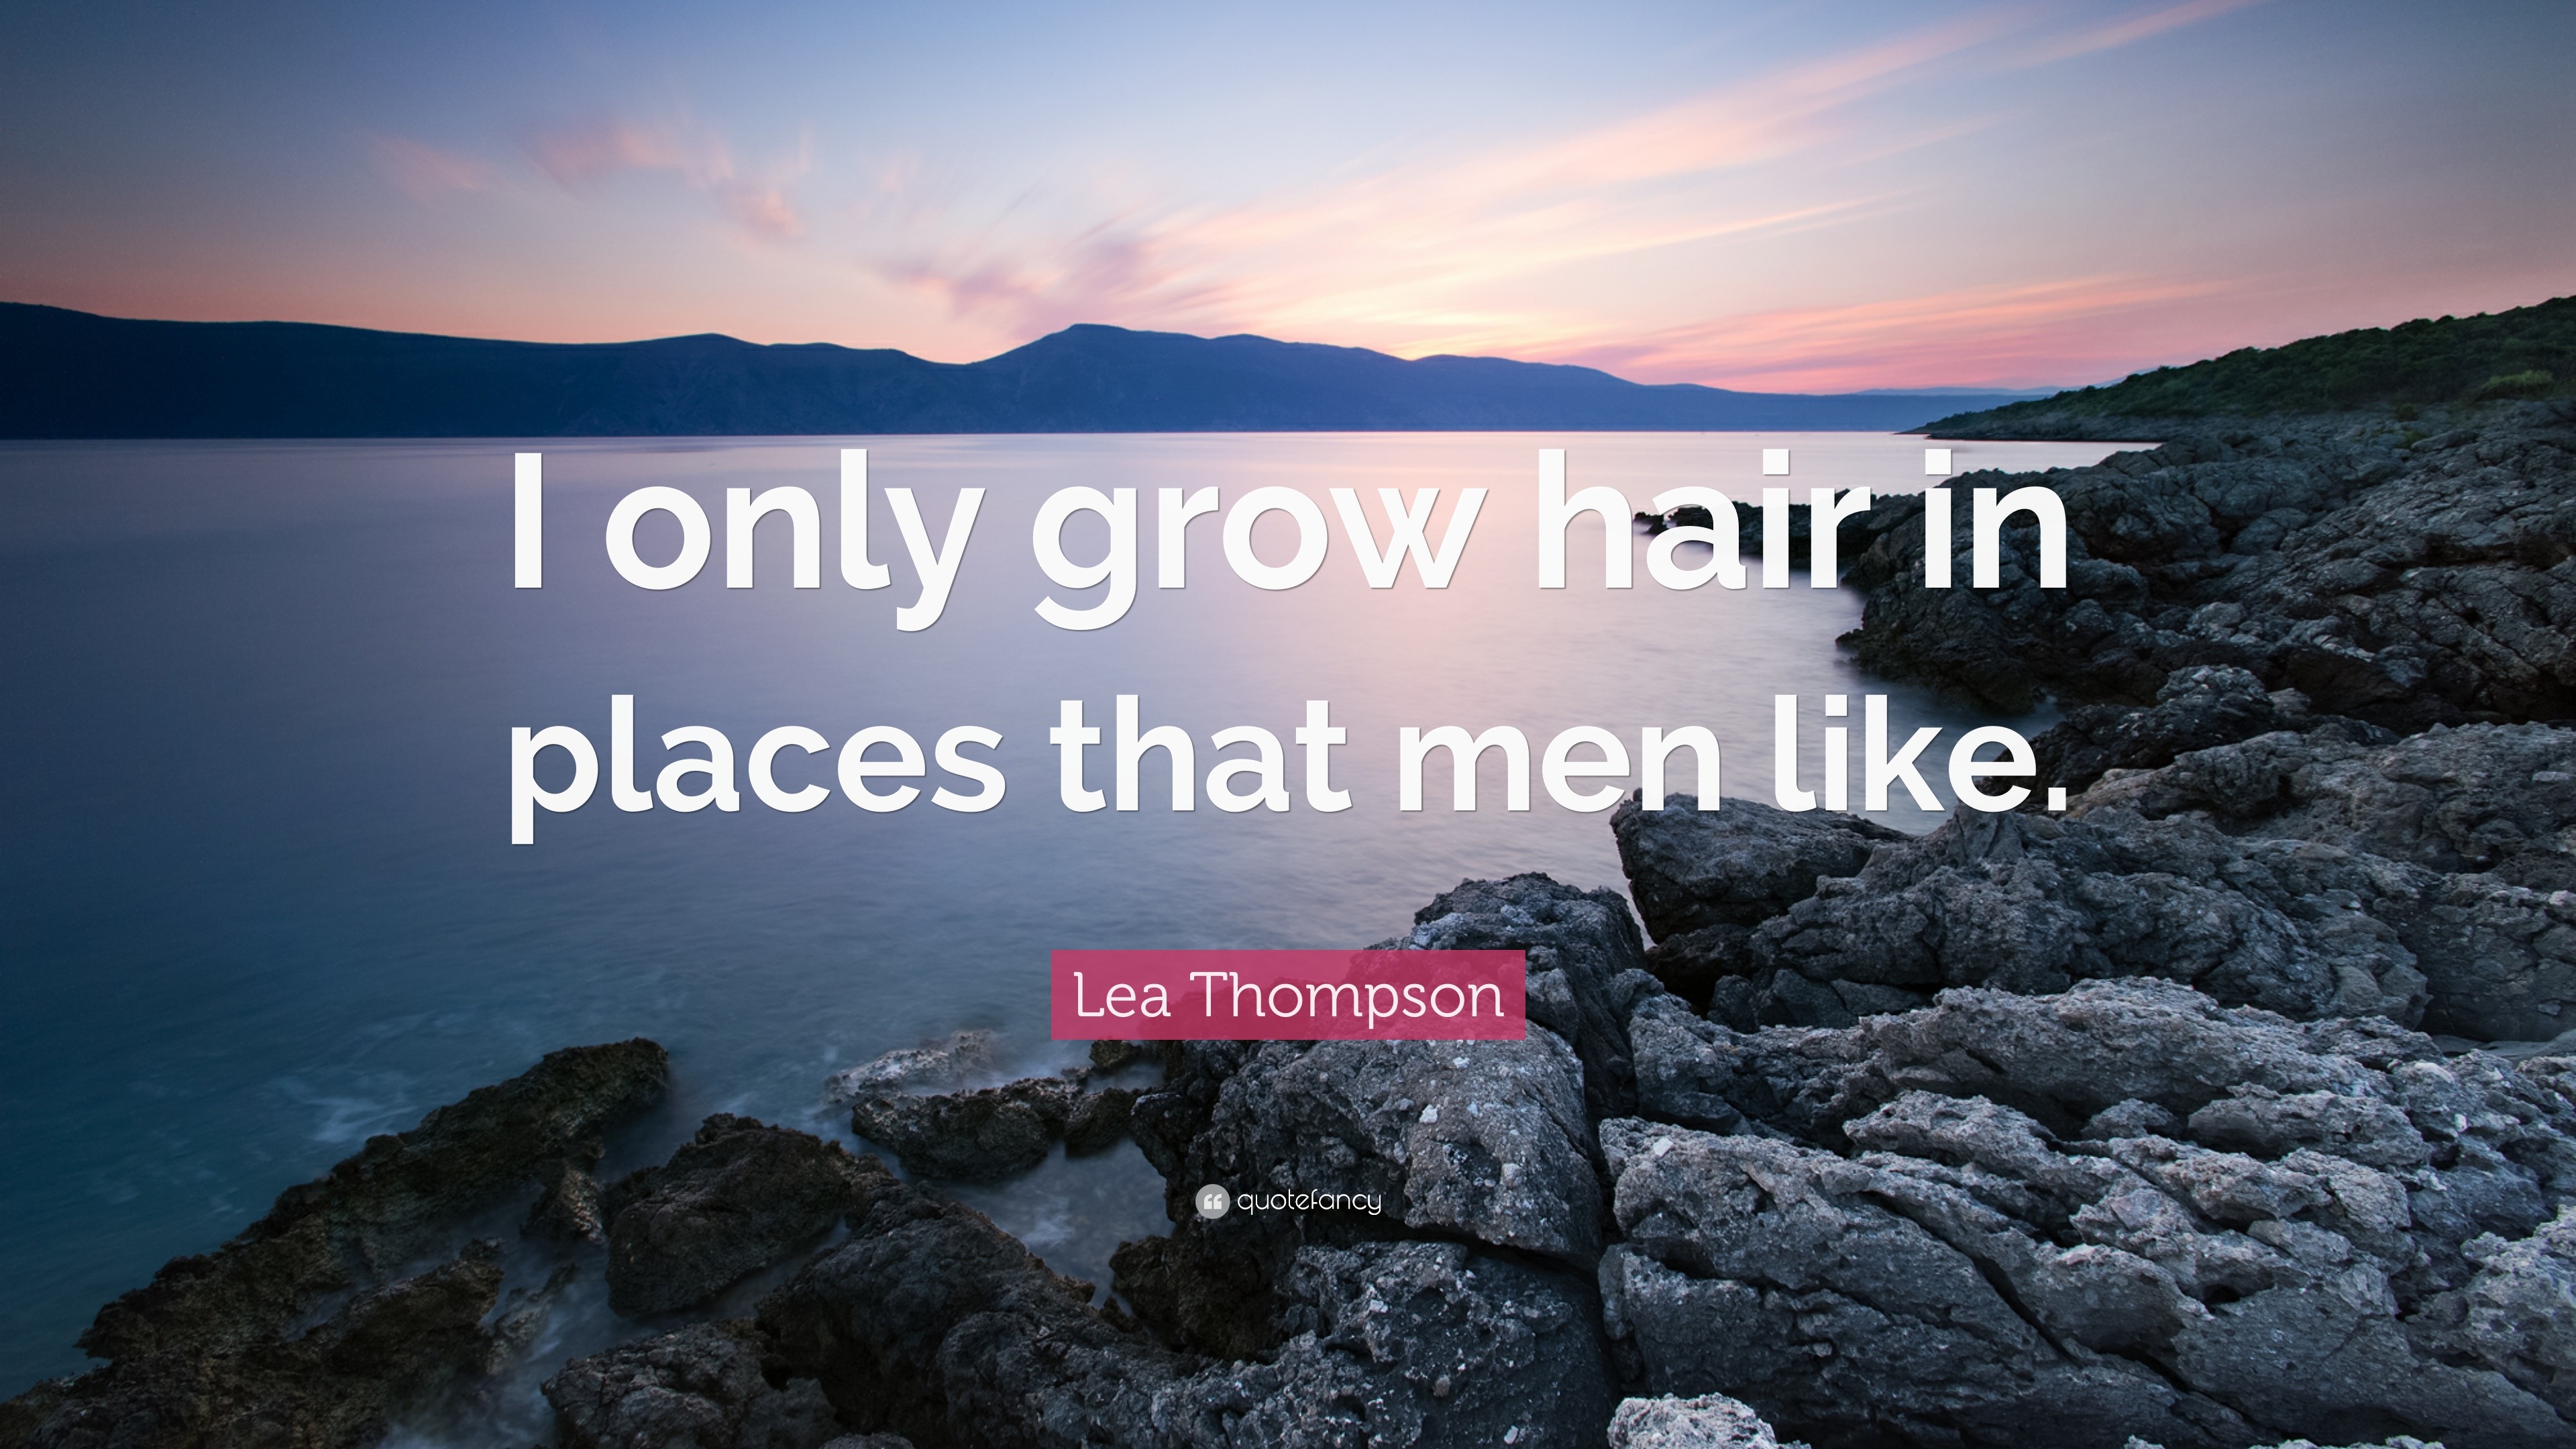 Lea Thompson Quote: “I only grow hair in places that men like.”